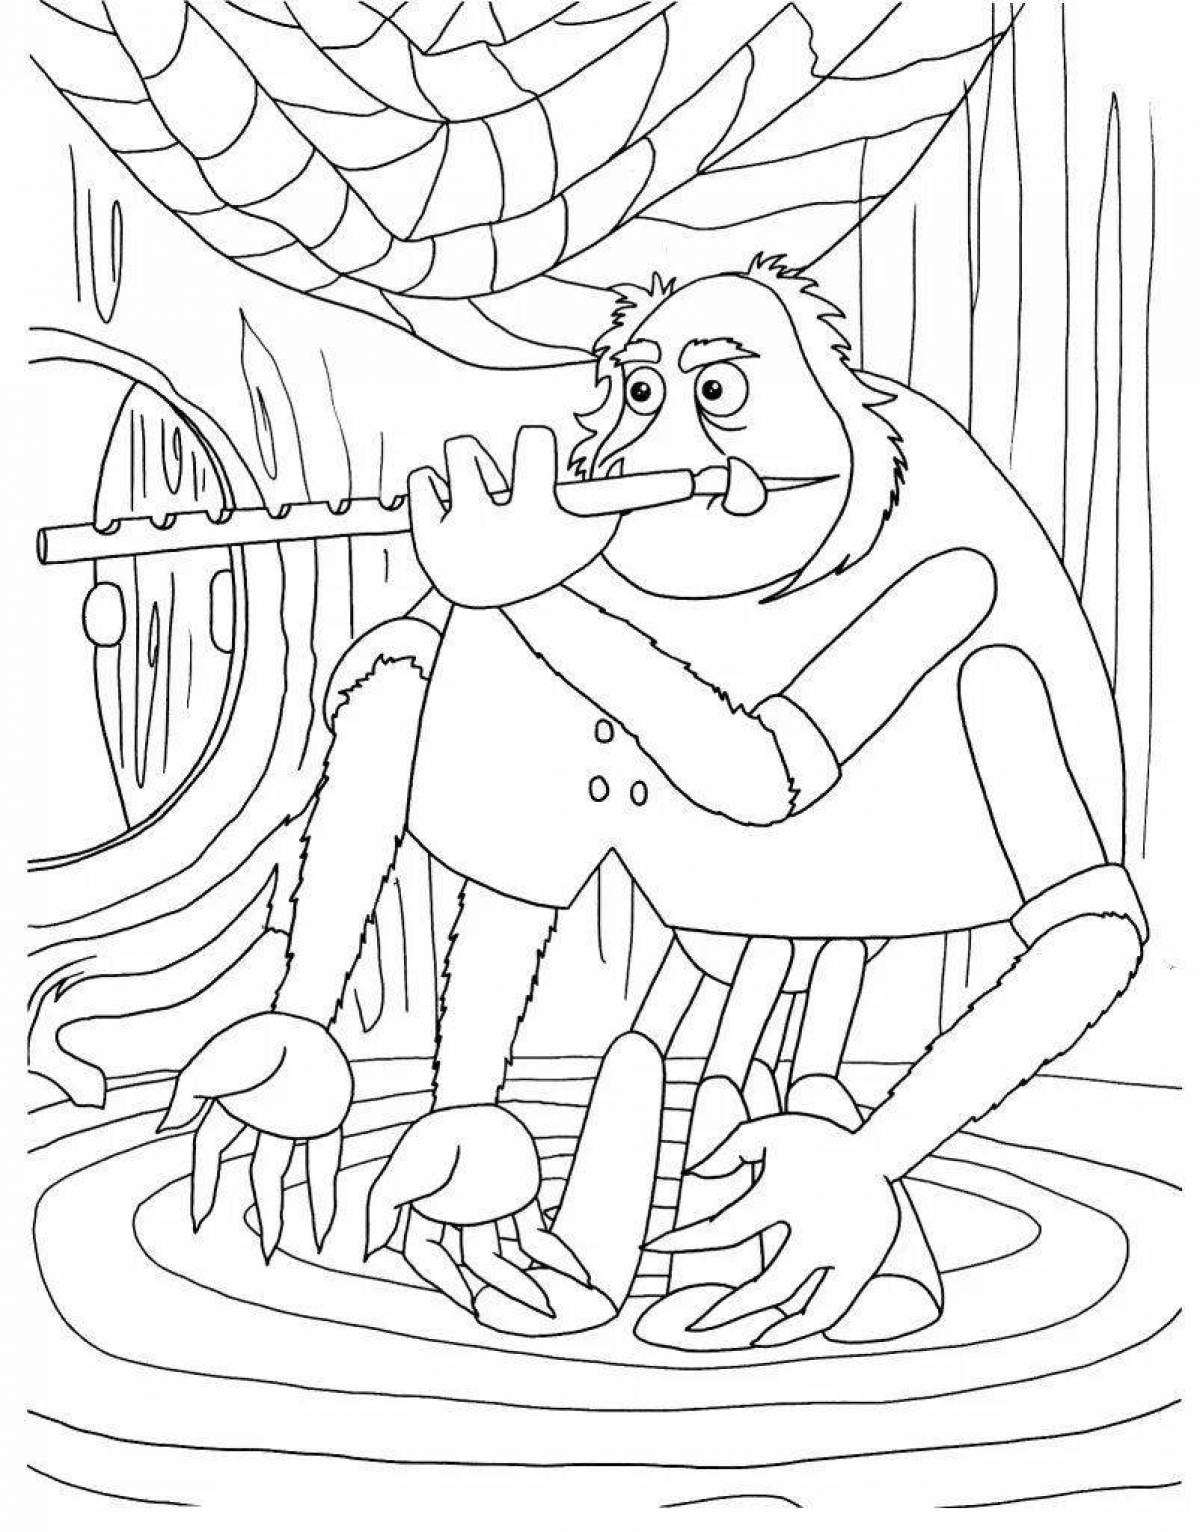 Coloring page cheerful householder